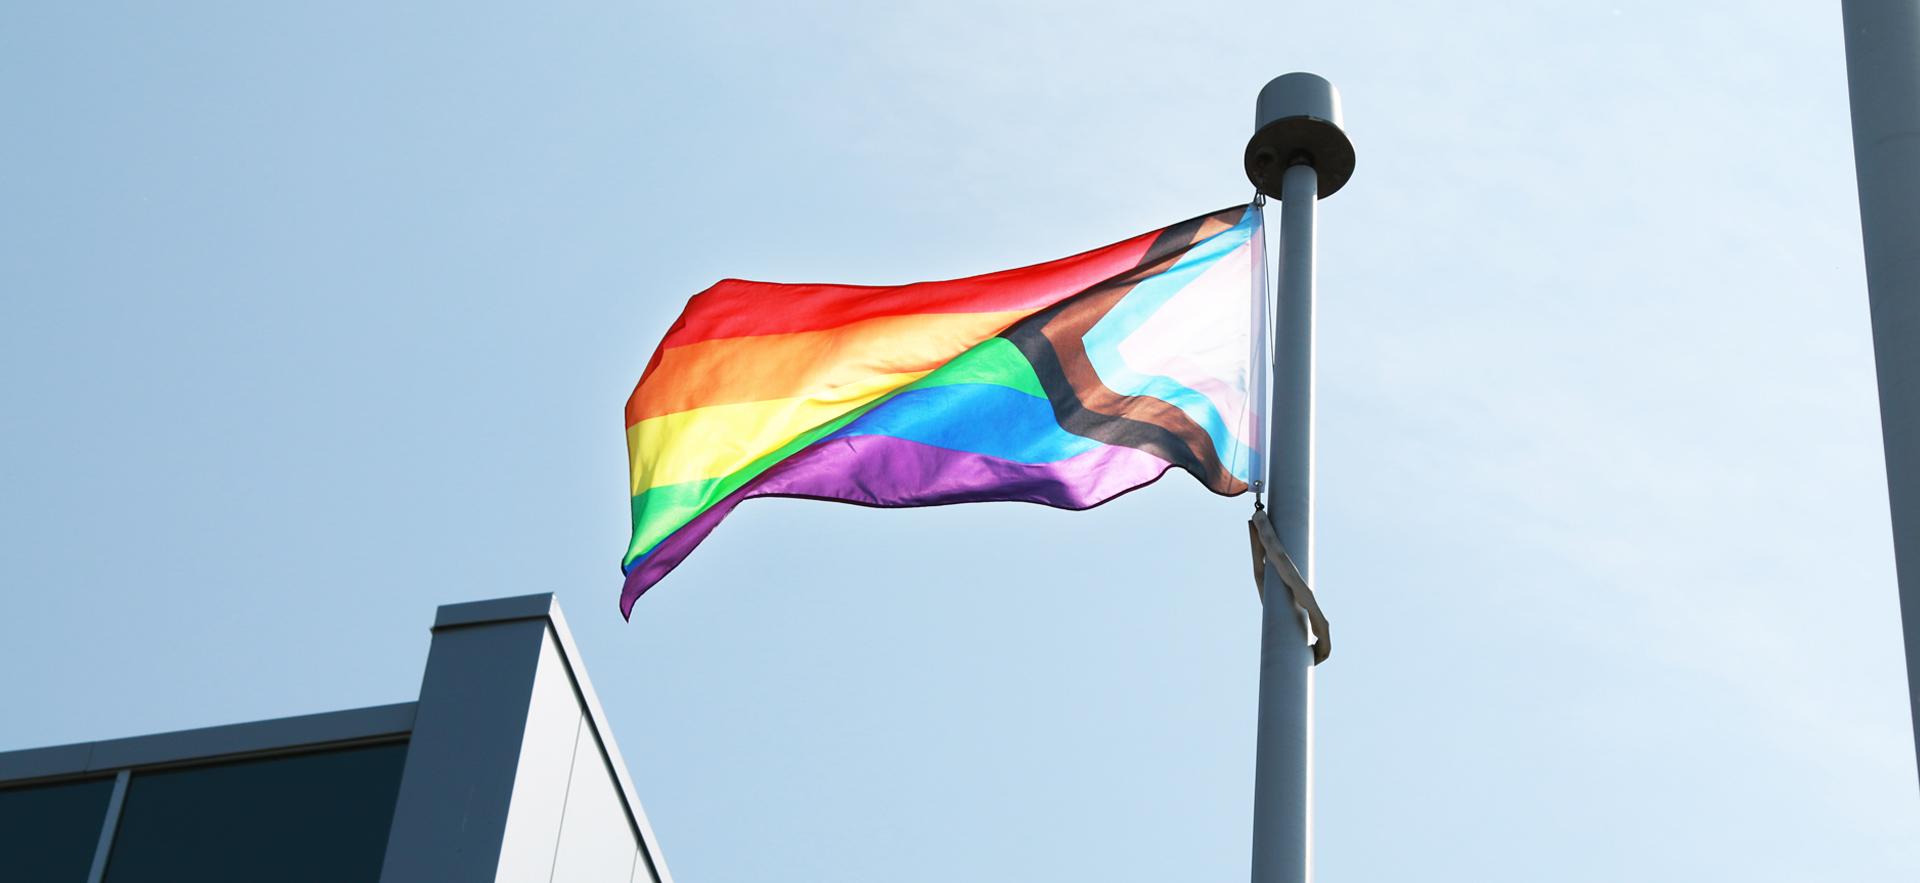 progress flag with red, orange, yellow, green, blue purple stripes blows in the wind